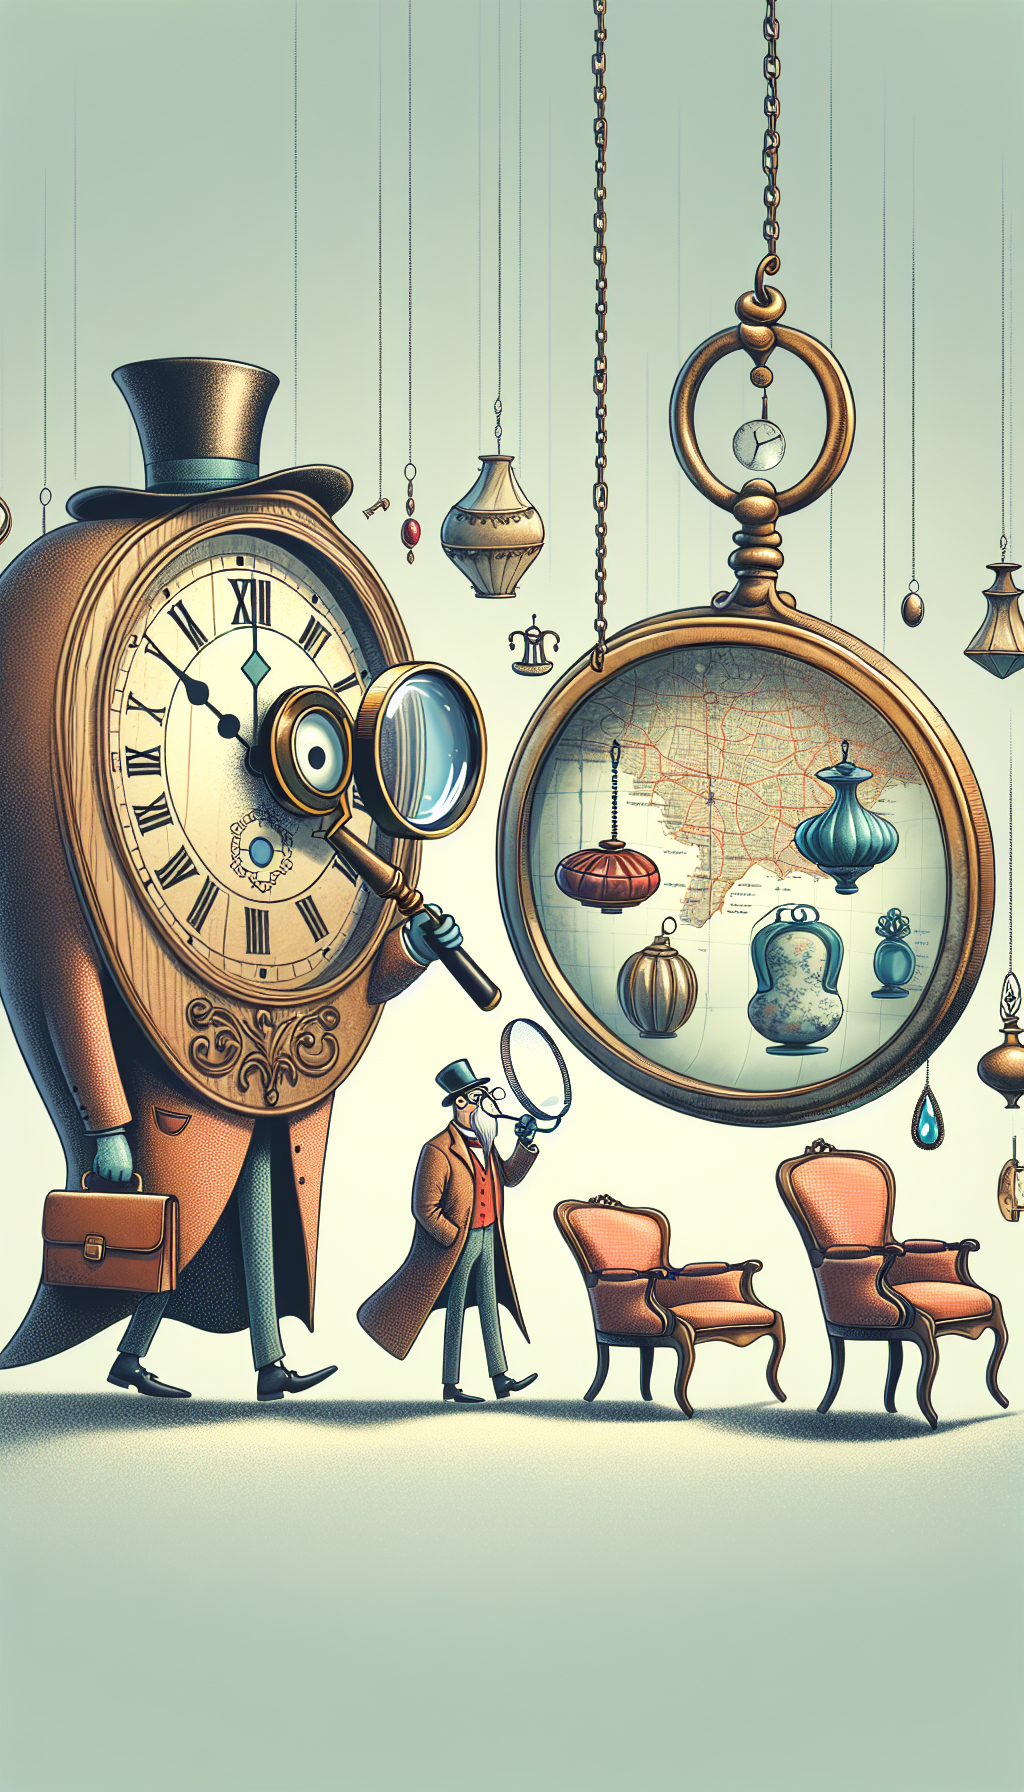 A whimsical illustration showcases an elder clock with a monocle, examining a line of eager antique chairs, vases, and jewelry as a sophisticated appraiser might. Above, a magnifying glass hovers, with a map inside pinpointing various nearby locations, symbolizing 'antique furniture appraisals near me.' The fusion of antique charm and modern search radiates the essence of preserving one’s heritage through expert valuation.